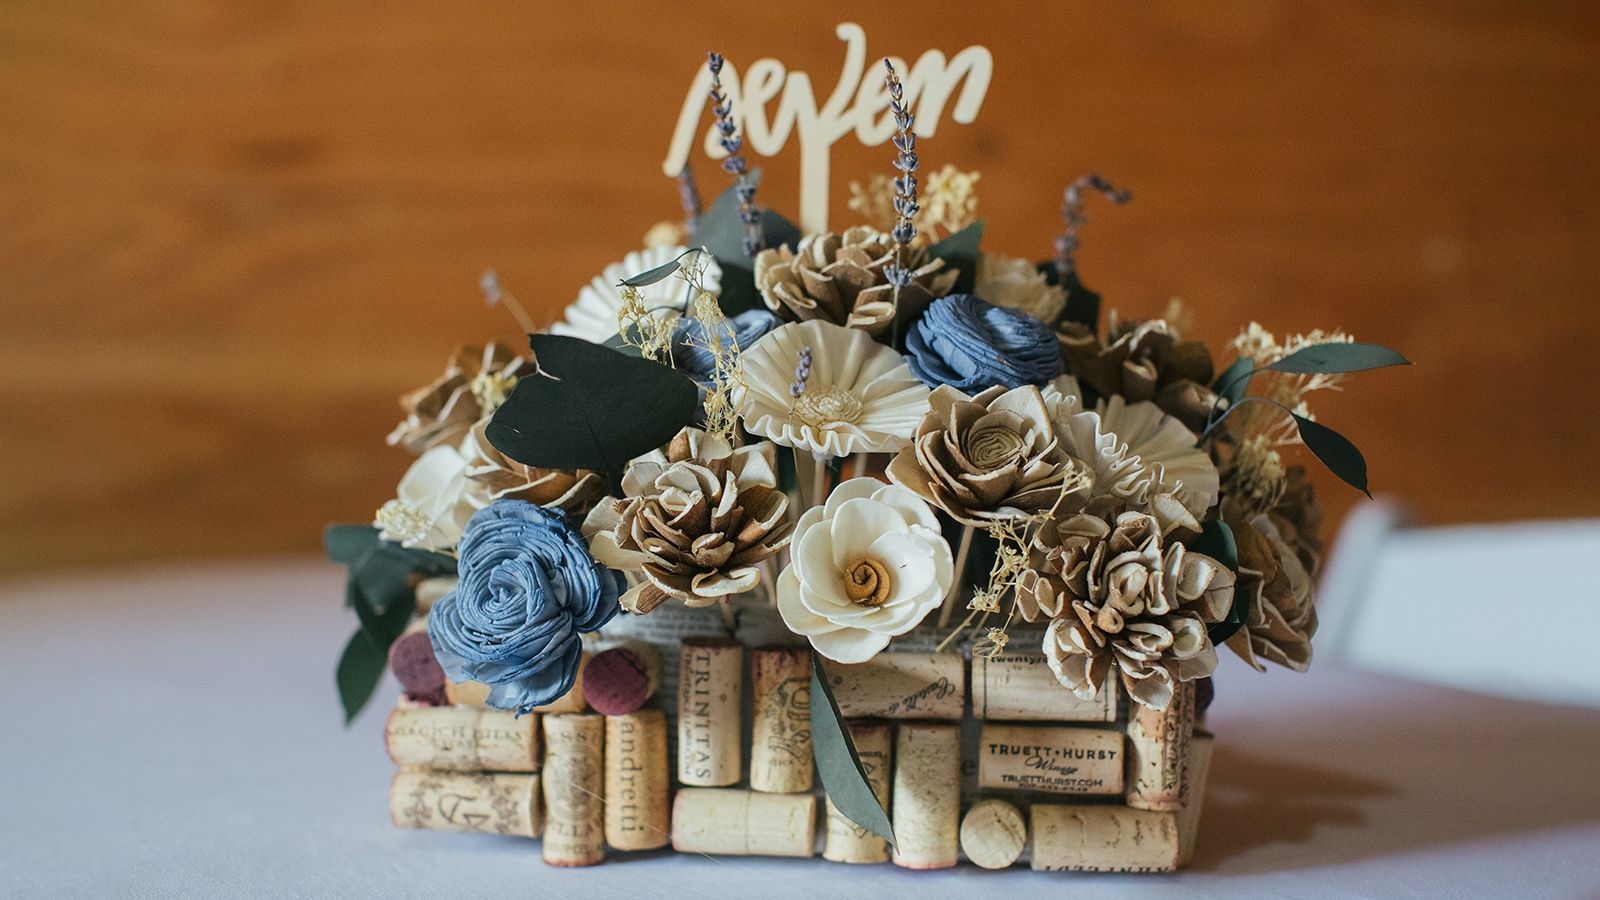 Vacaville, CA - November 10, 2018: A handmade wedding reception table centerpiece with flowers made from wood and paper.